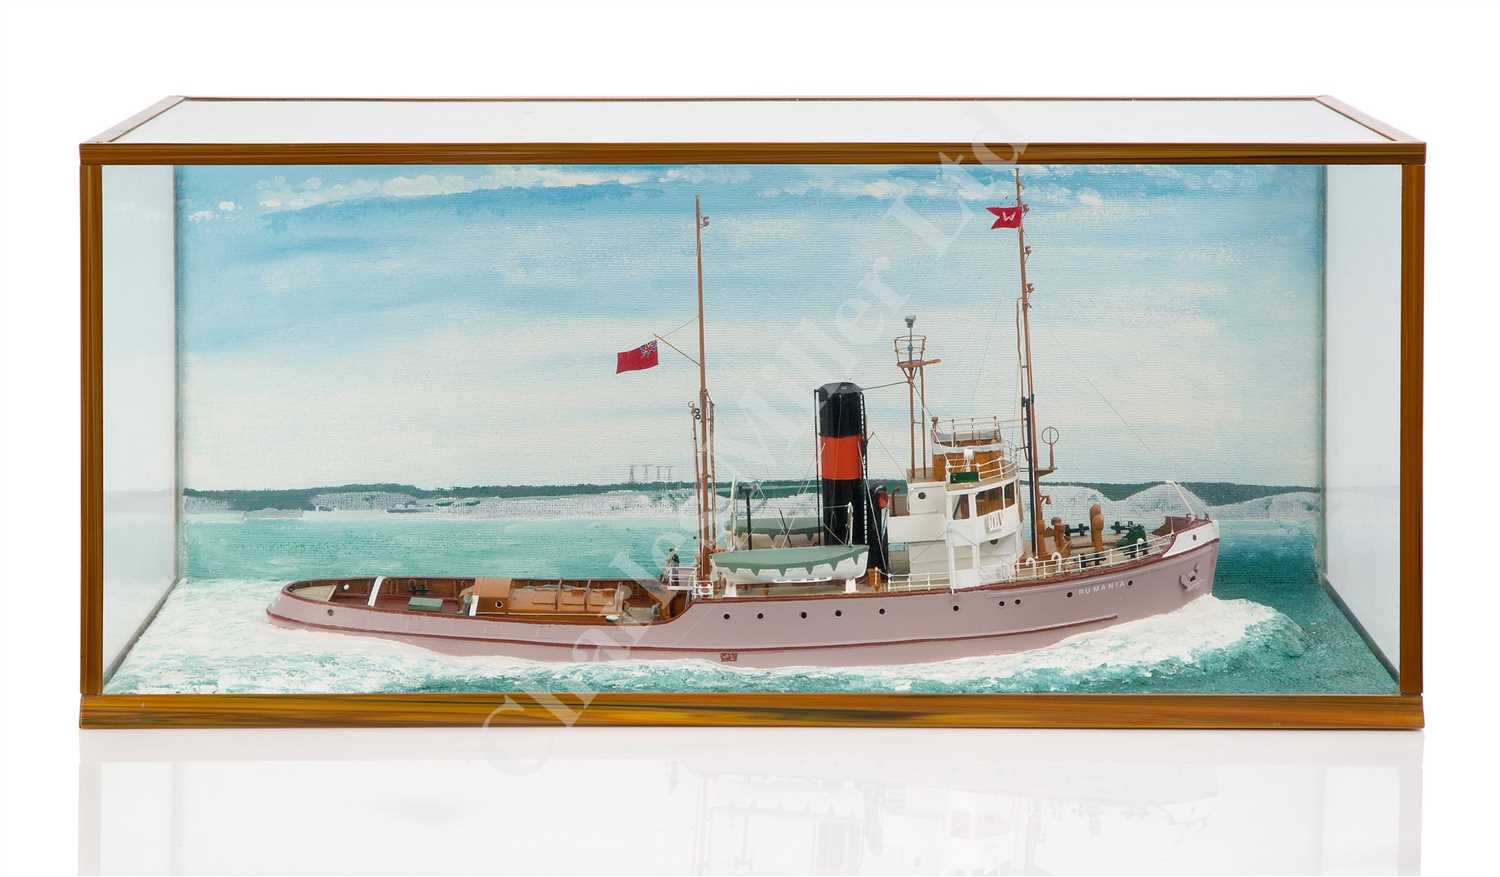 Lot 334 - A WELL PRESENTED WATERLINE MODEL FOR THE TUG RUMANIA, ORIGINALLY BUILT BY CLELENDS SUCCESSORS FOR WILLIAM WATKINS LTD, 1944